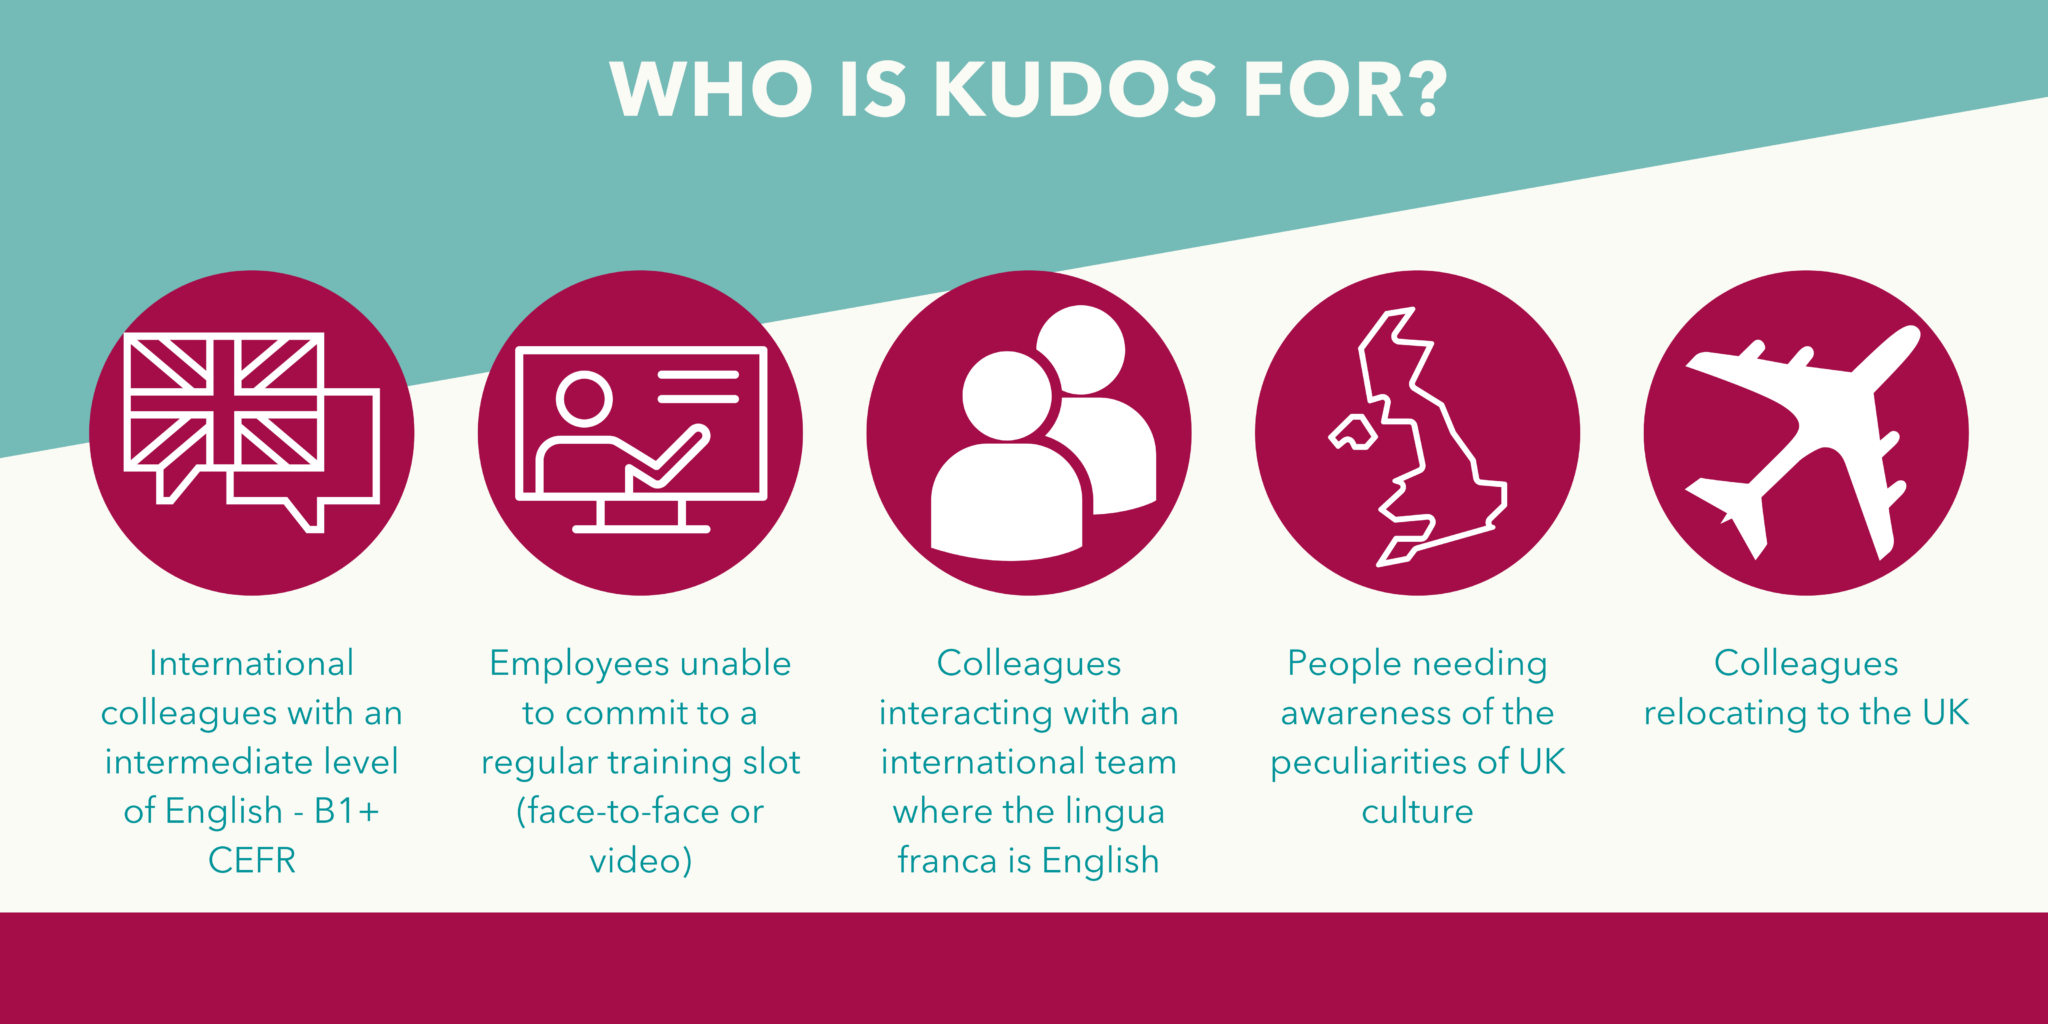 Who is Kudos for?